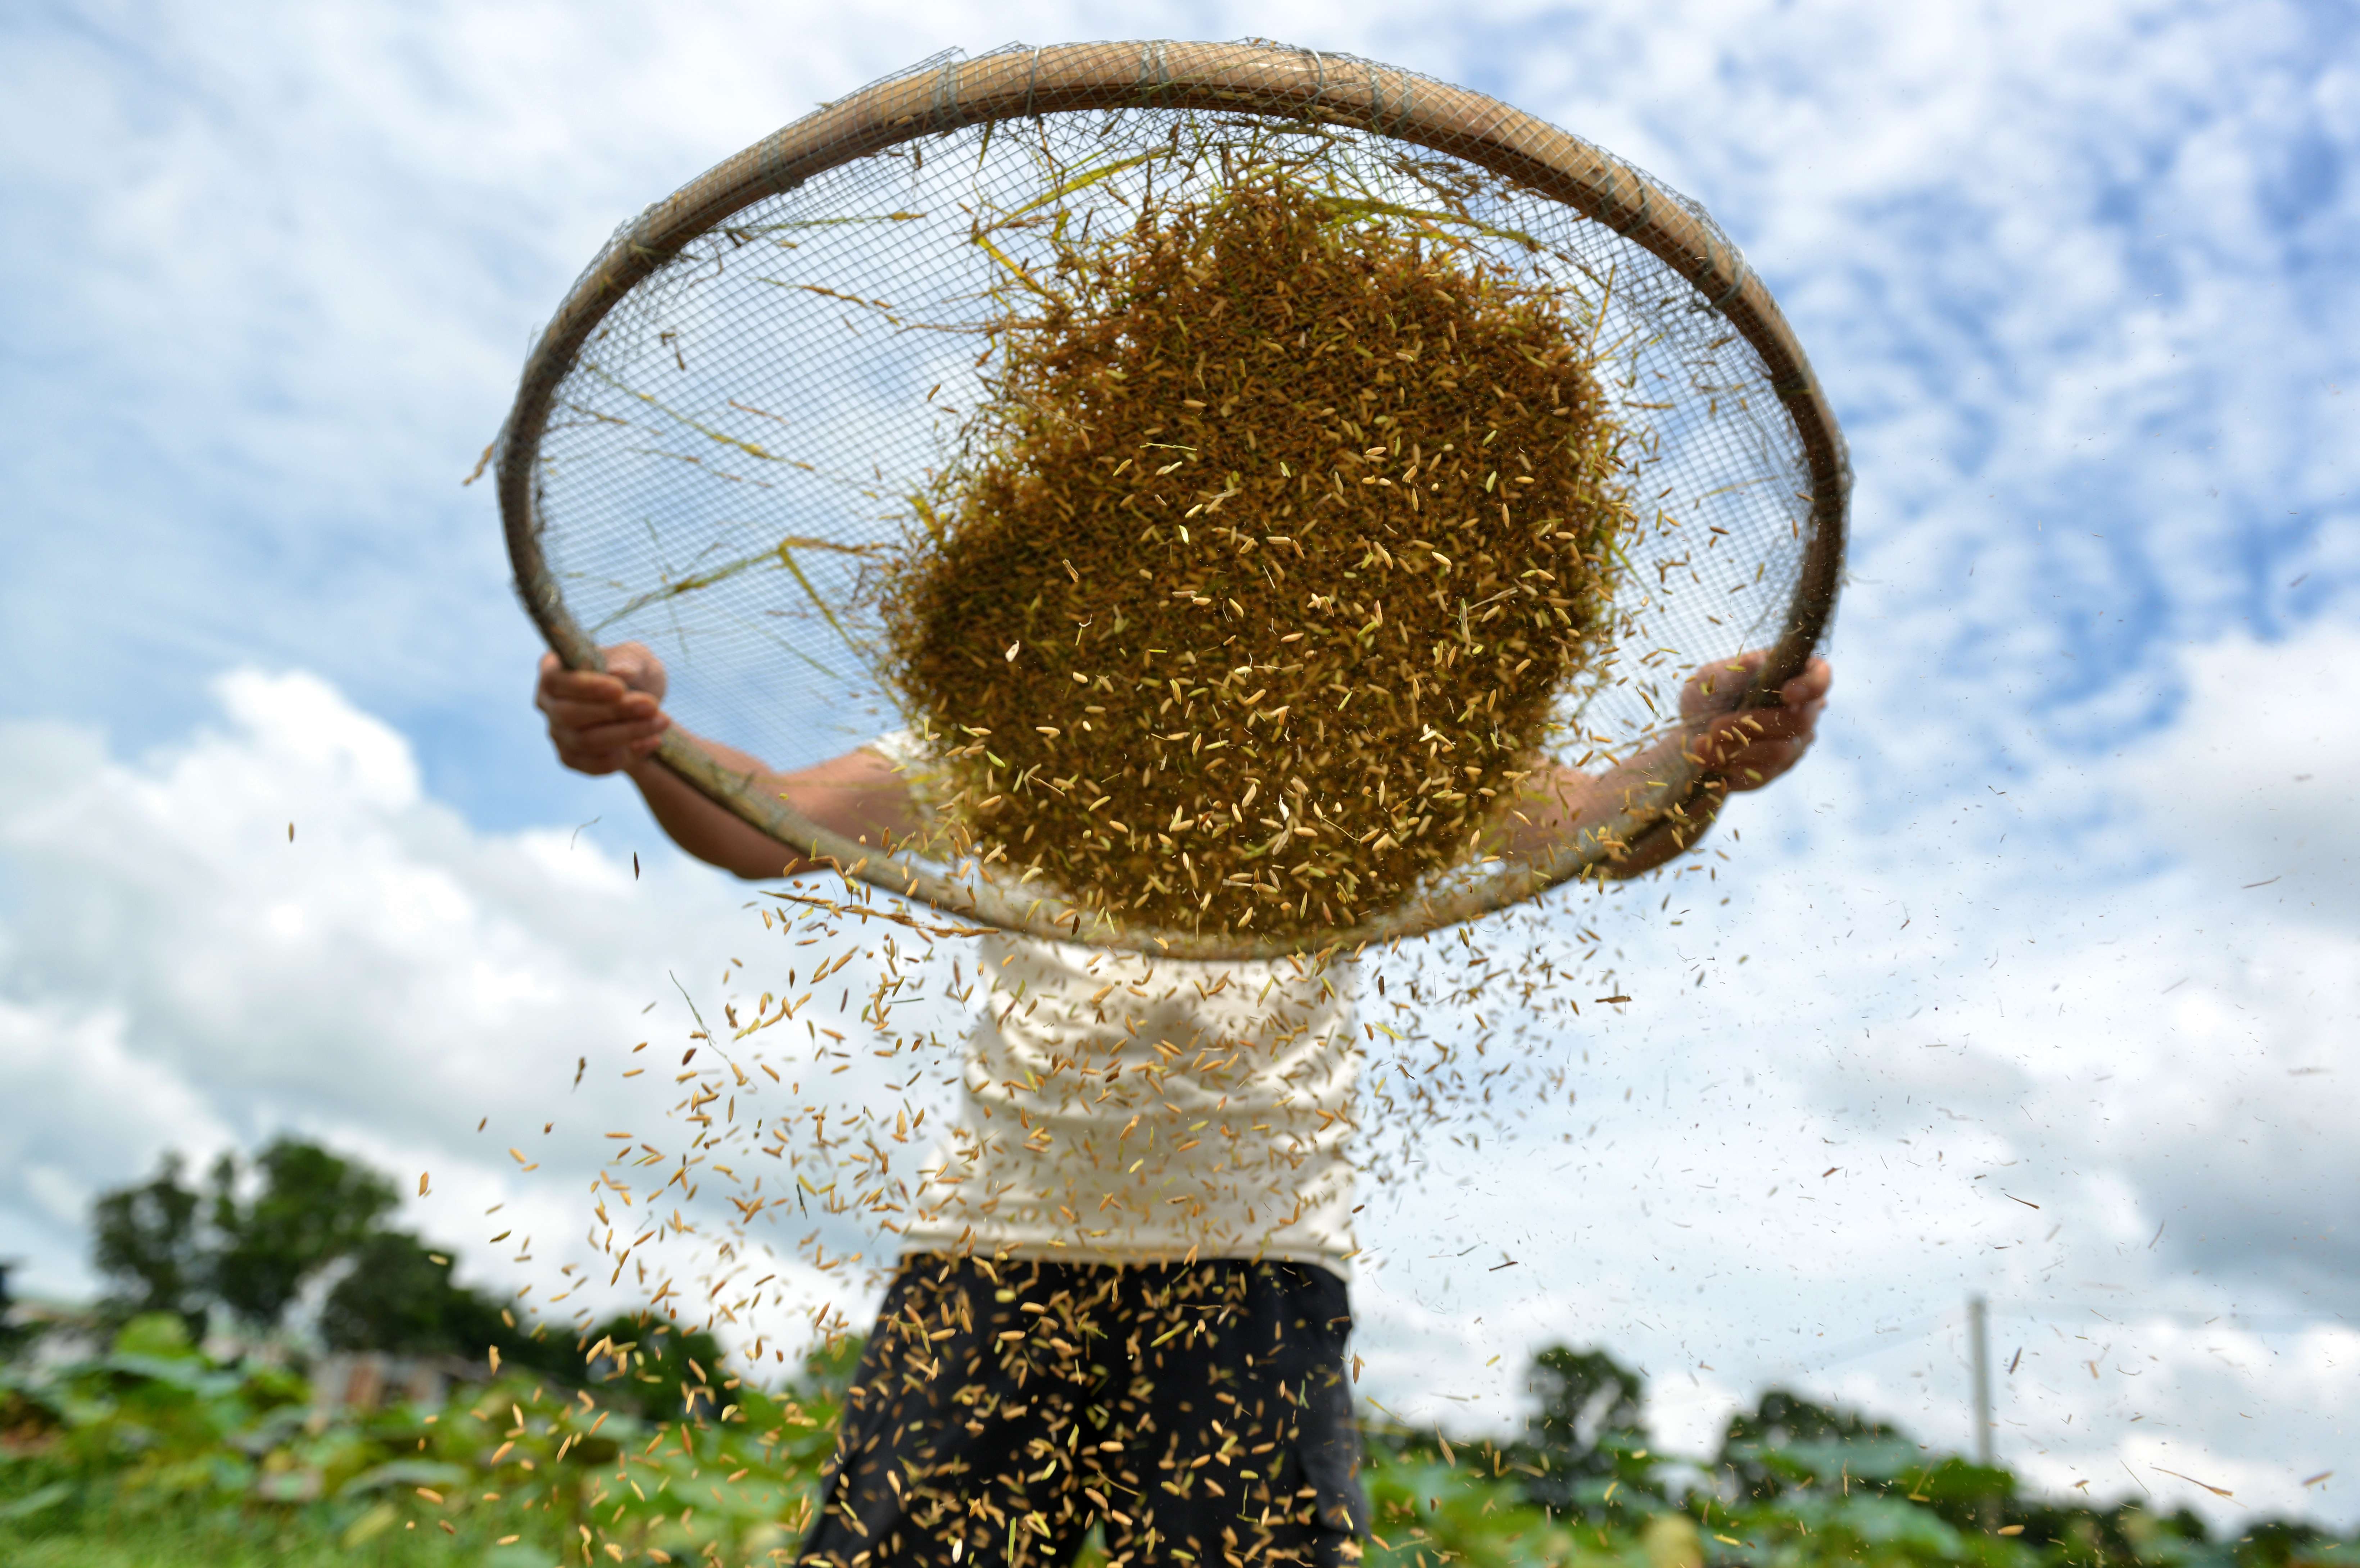 A sieve is used to remove large debris from rice freshly harvested from the paddy fields in Long Valley, Sheung Shui. Photo: Thomas Yau